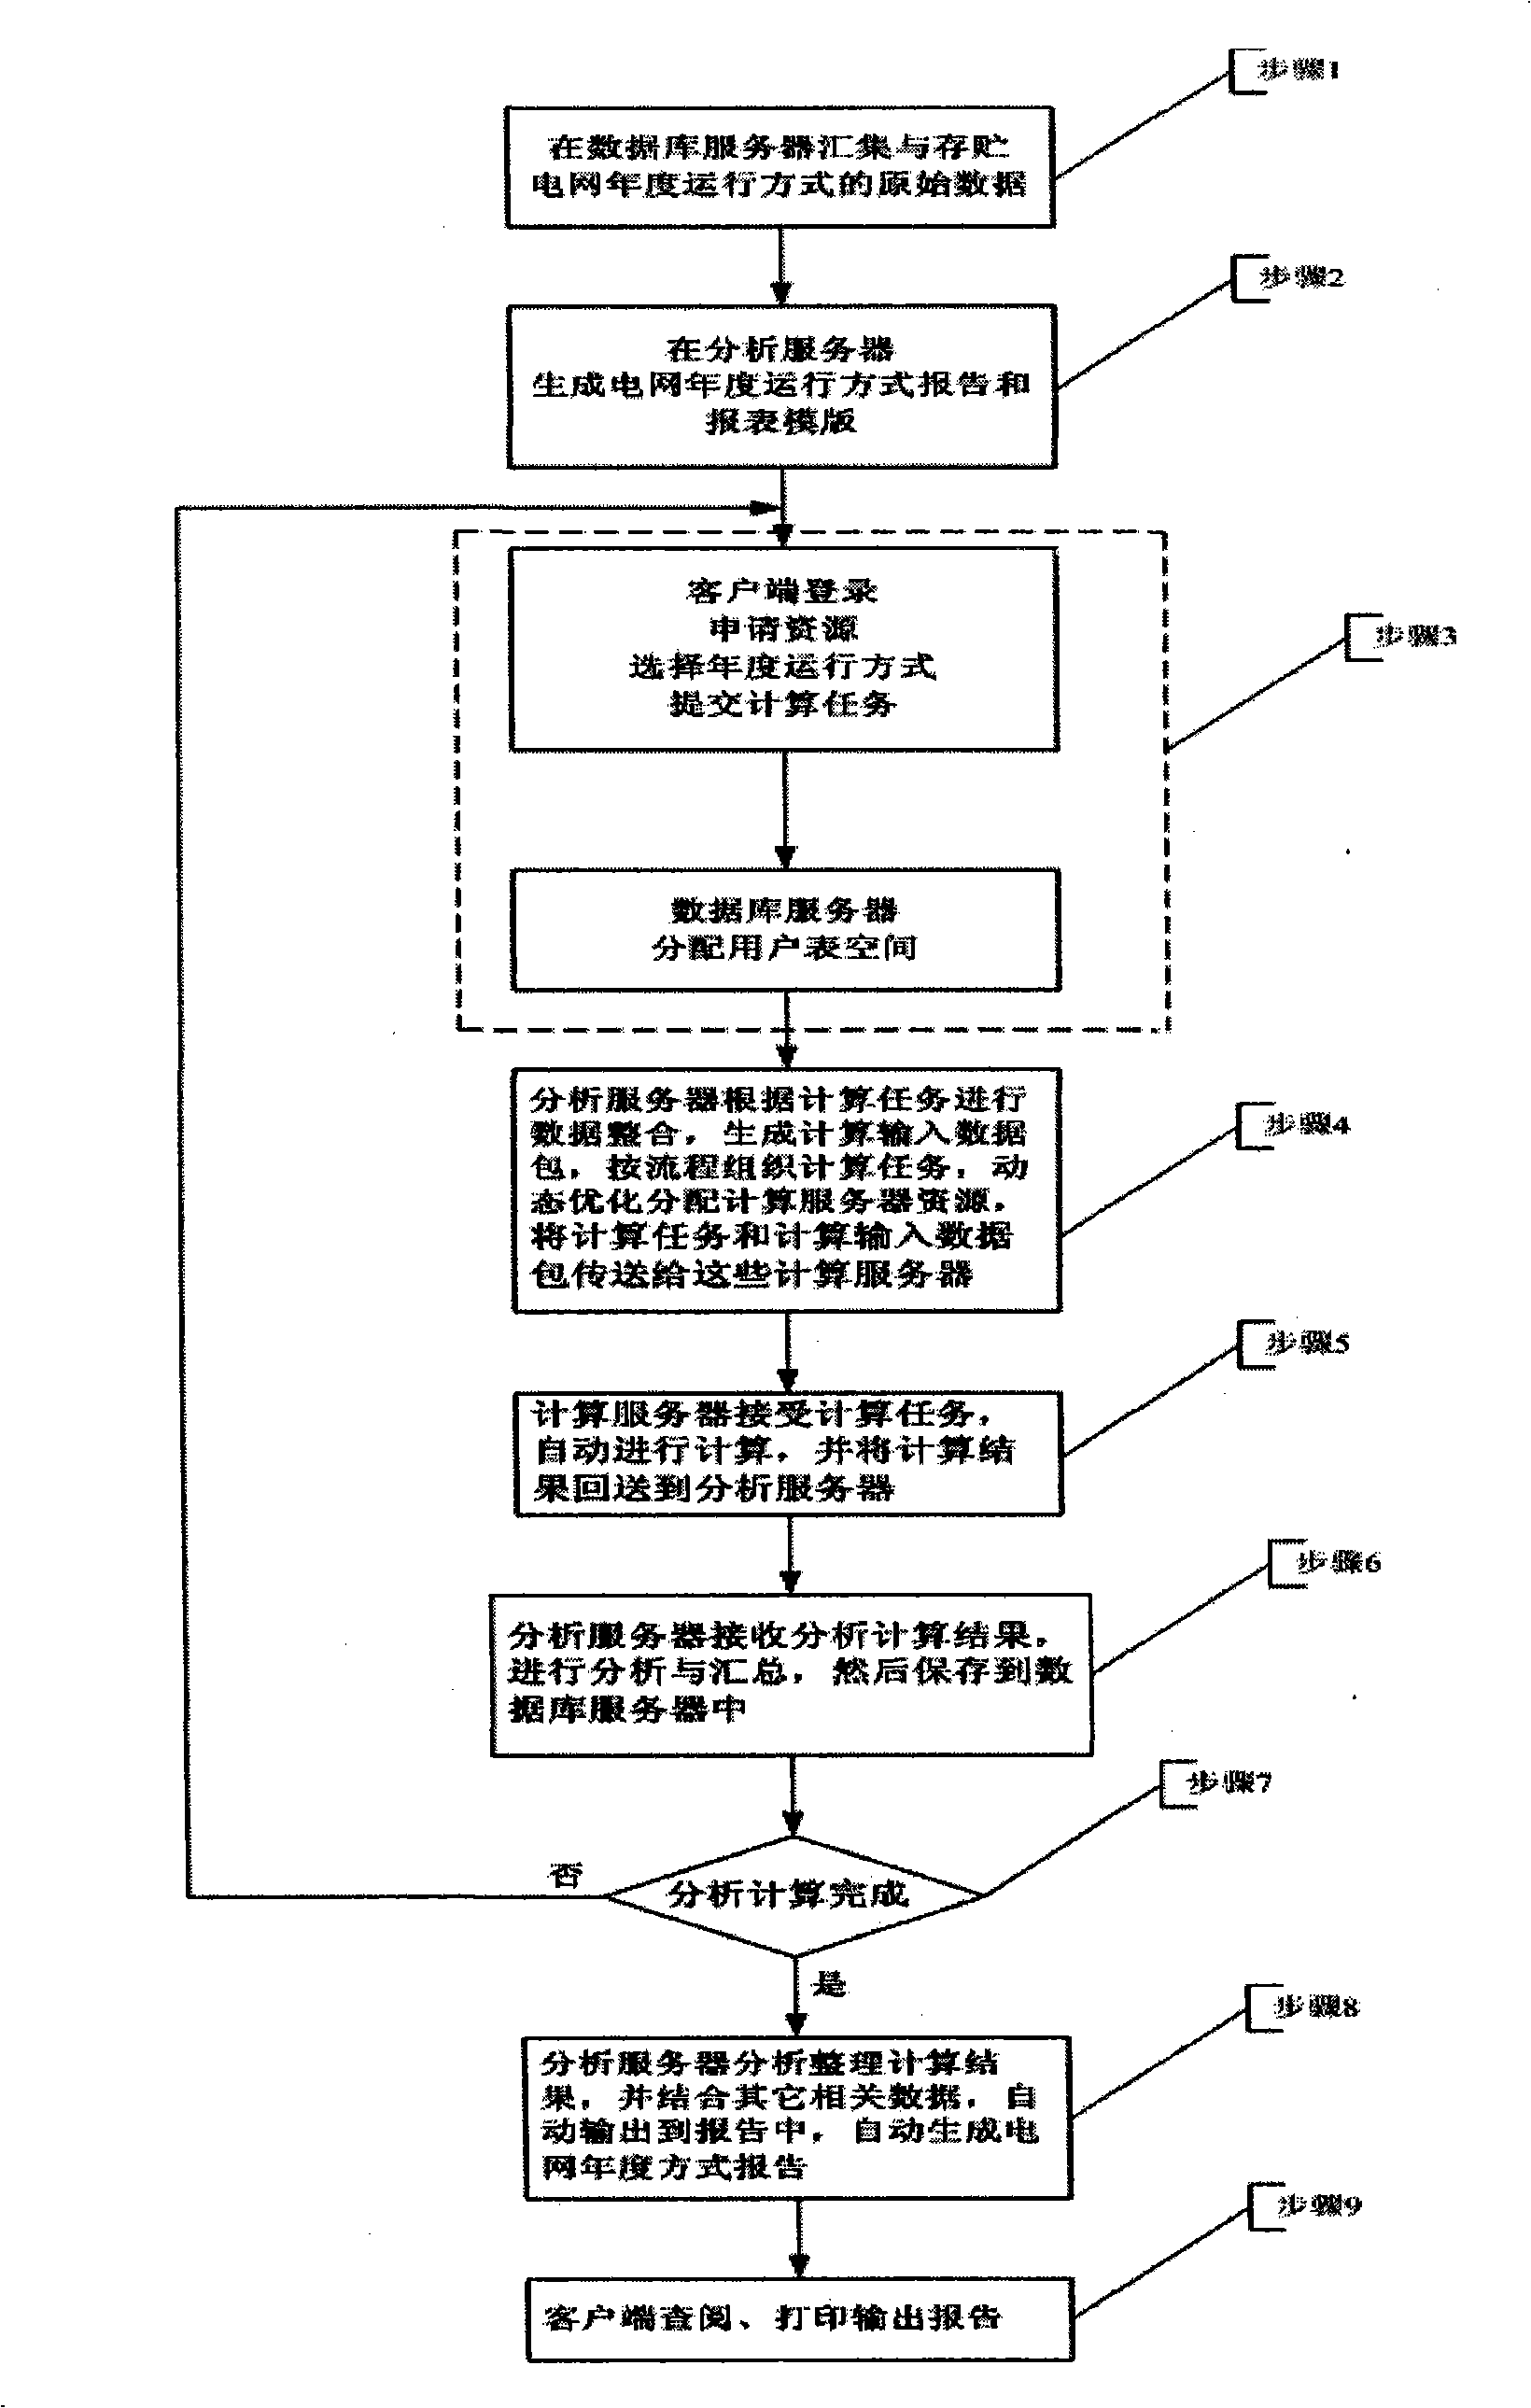 Method for automatically generating annual running mode report of power grid